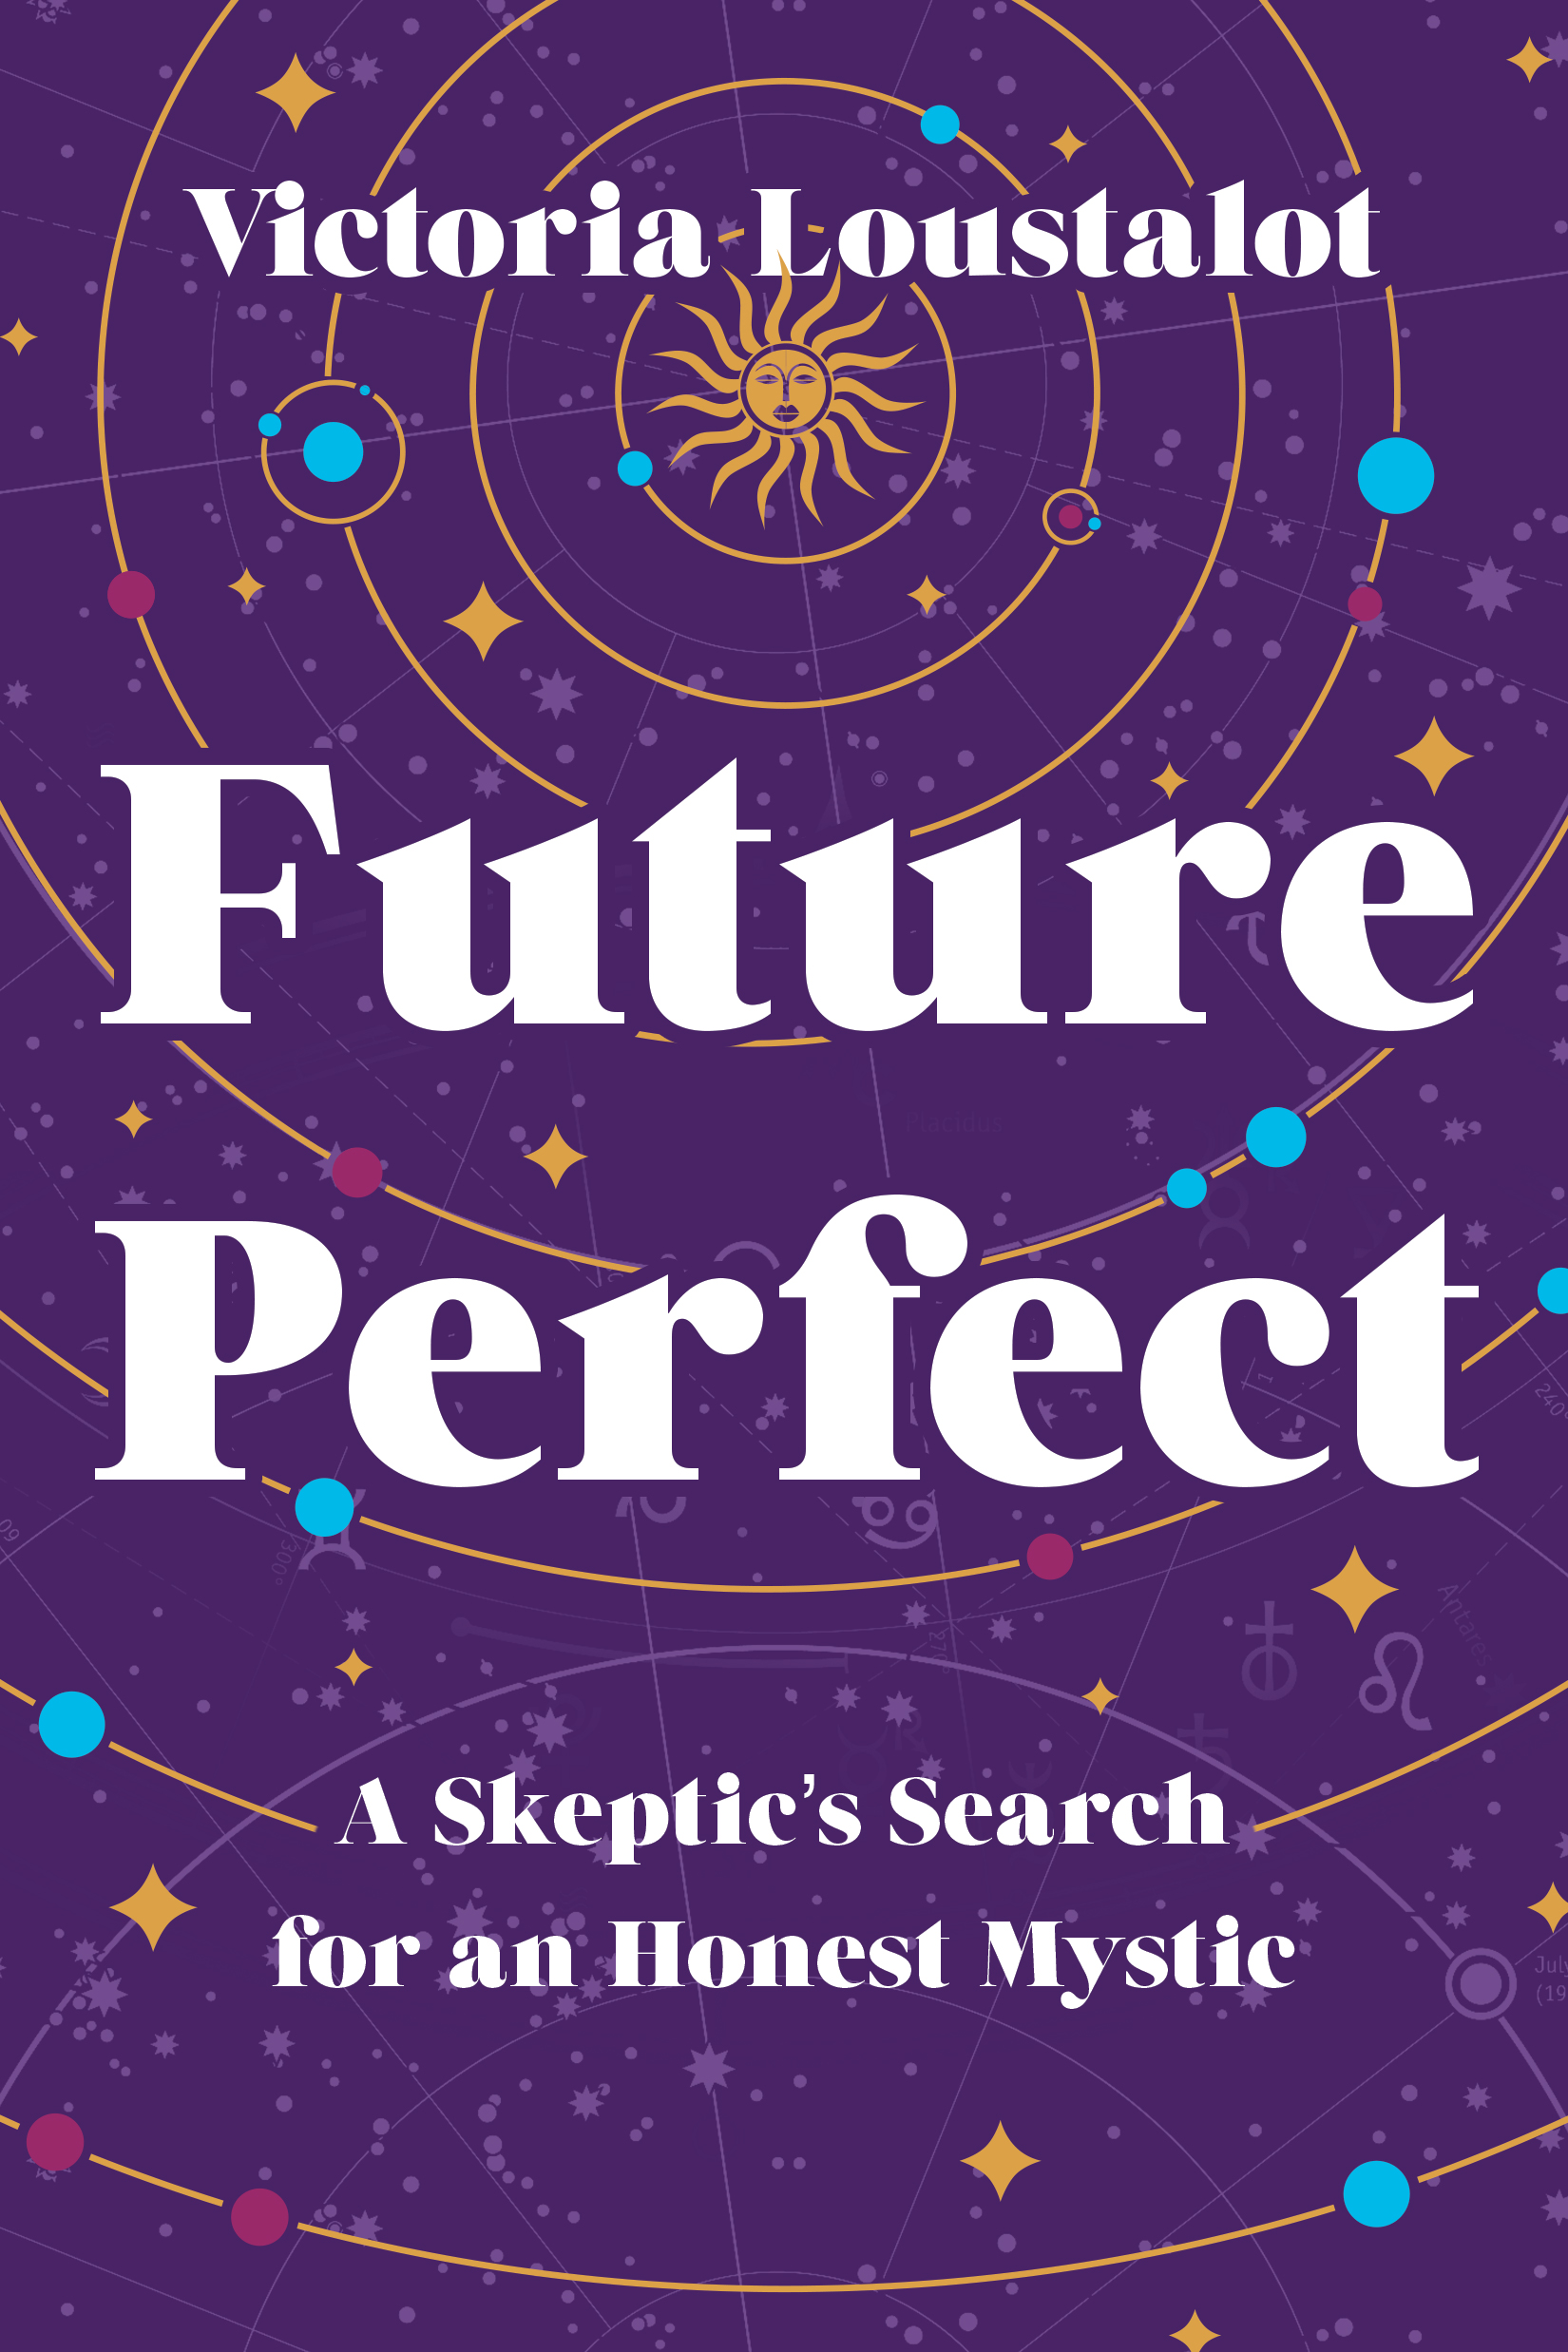 Book Launch: Future Perfect by Victoria Loustalot, in conversation with Ankur Thakkar and mini-readings by psychic Catherine River-Rain